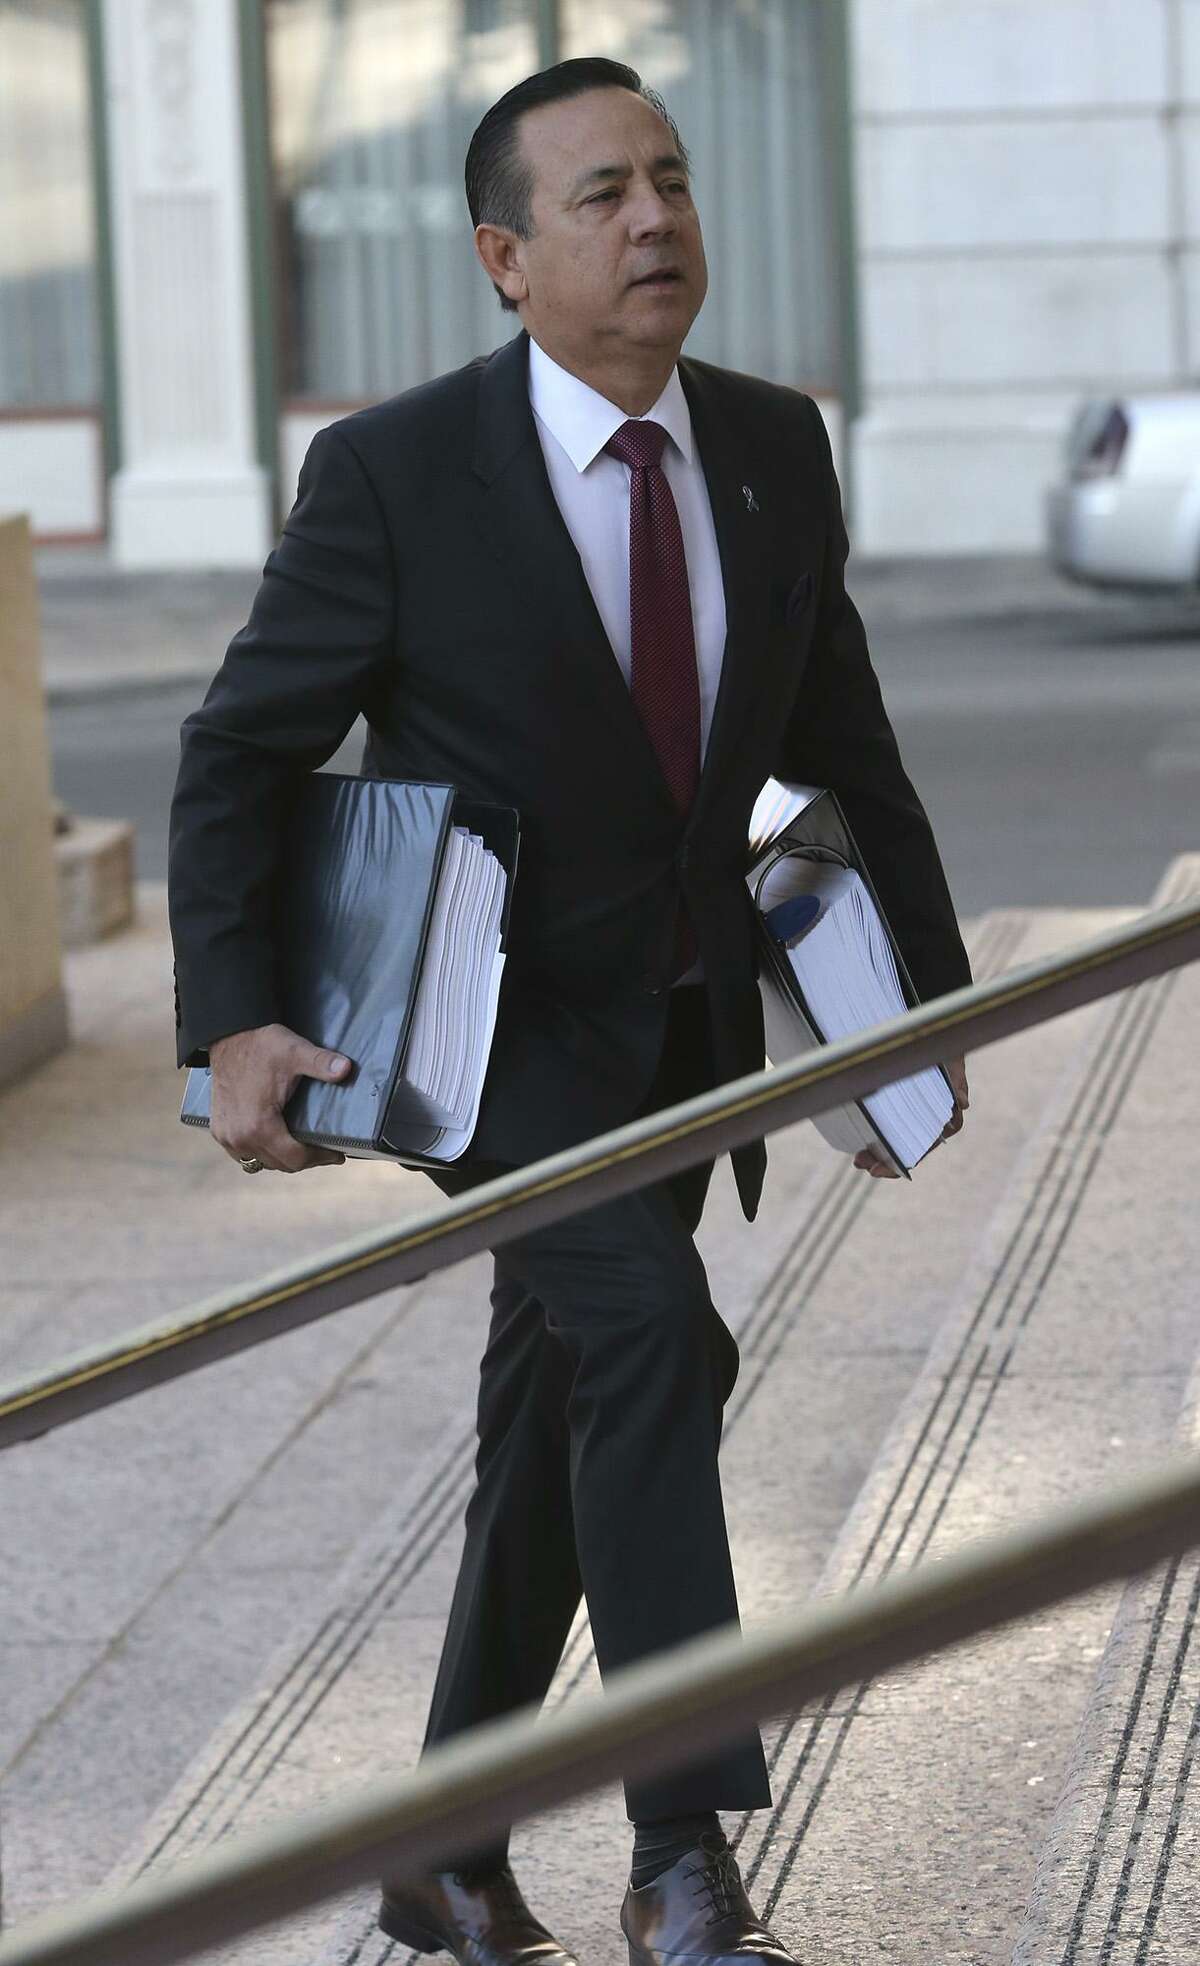 State. Sen. Carlos Uresti is pictured in September before testifying in a bankruptcy court trial. On the witness stand, Uresti said that after FourWinds Logistics’ collapse he became aware that it “might have been a Ponzi scheme.” In February, a federal jury convicted Uresti on 11 felony charges in a criminal trial that lasted almost five weeks. He is scheduled to be sentenced in June.